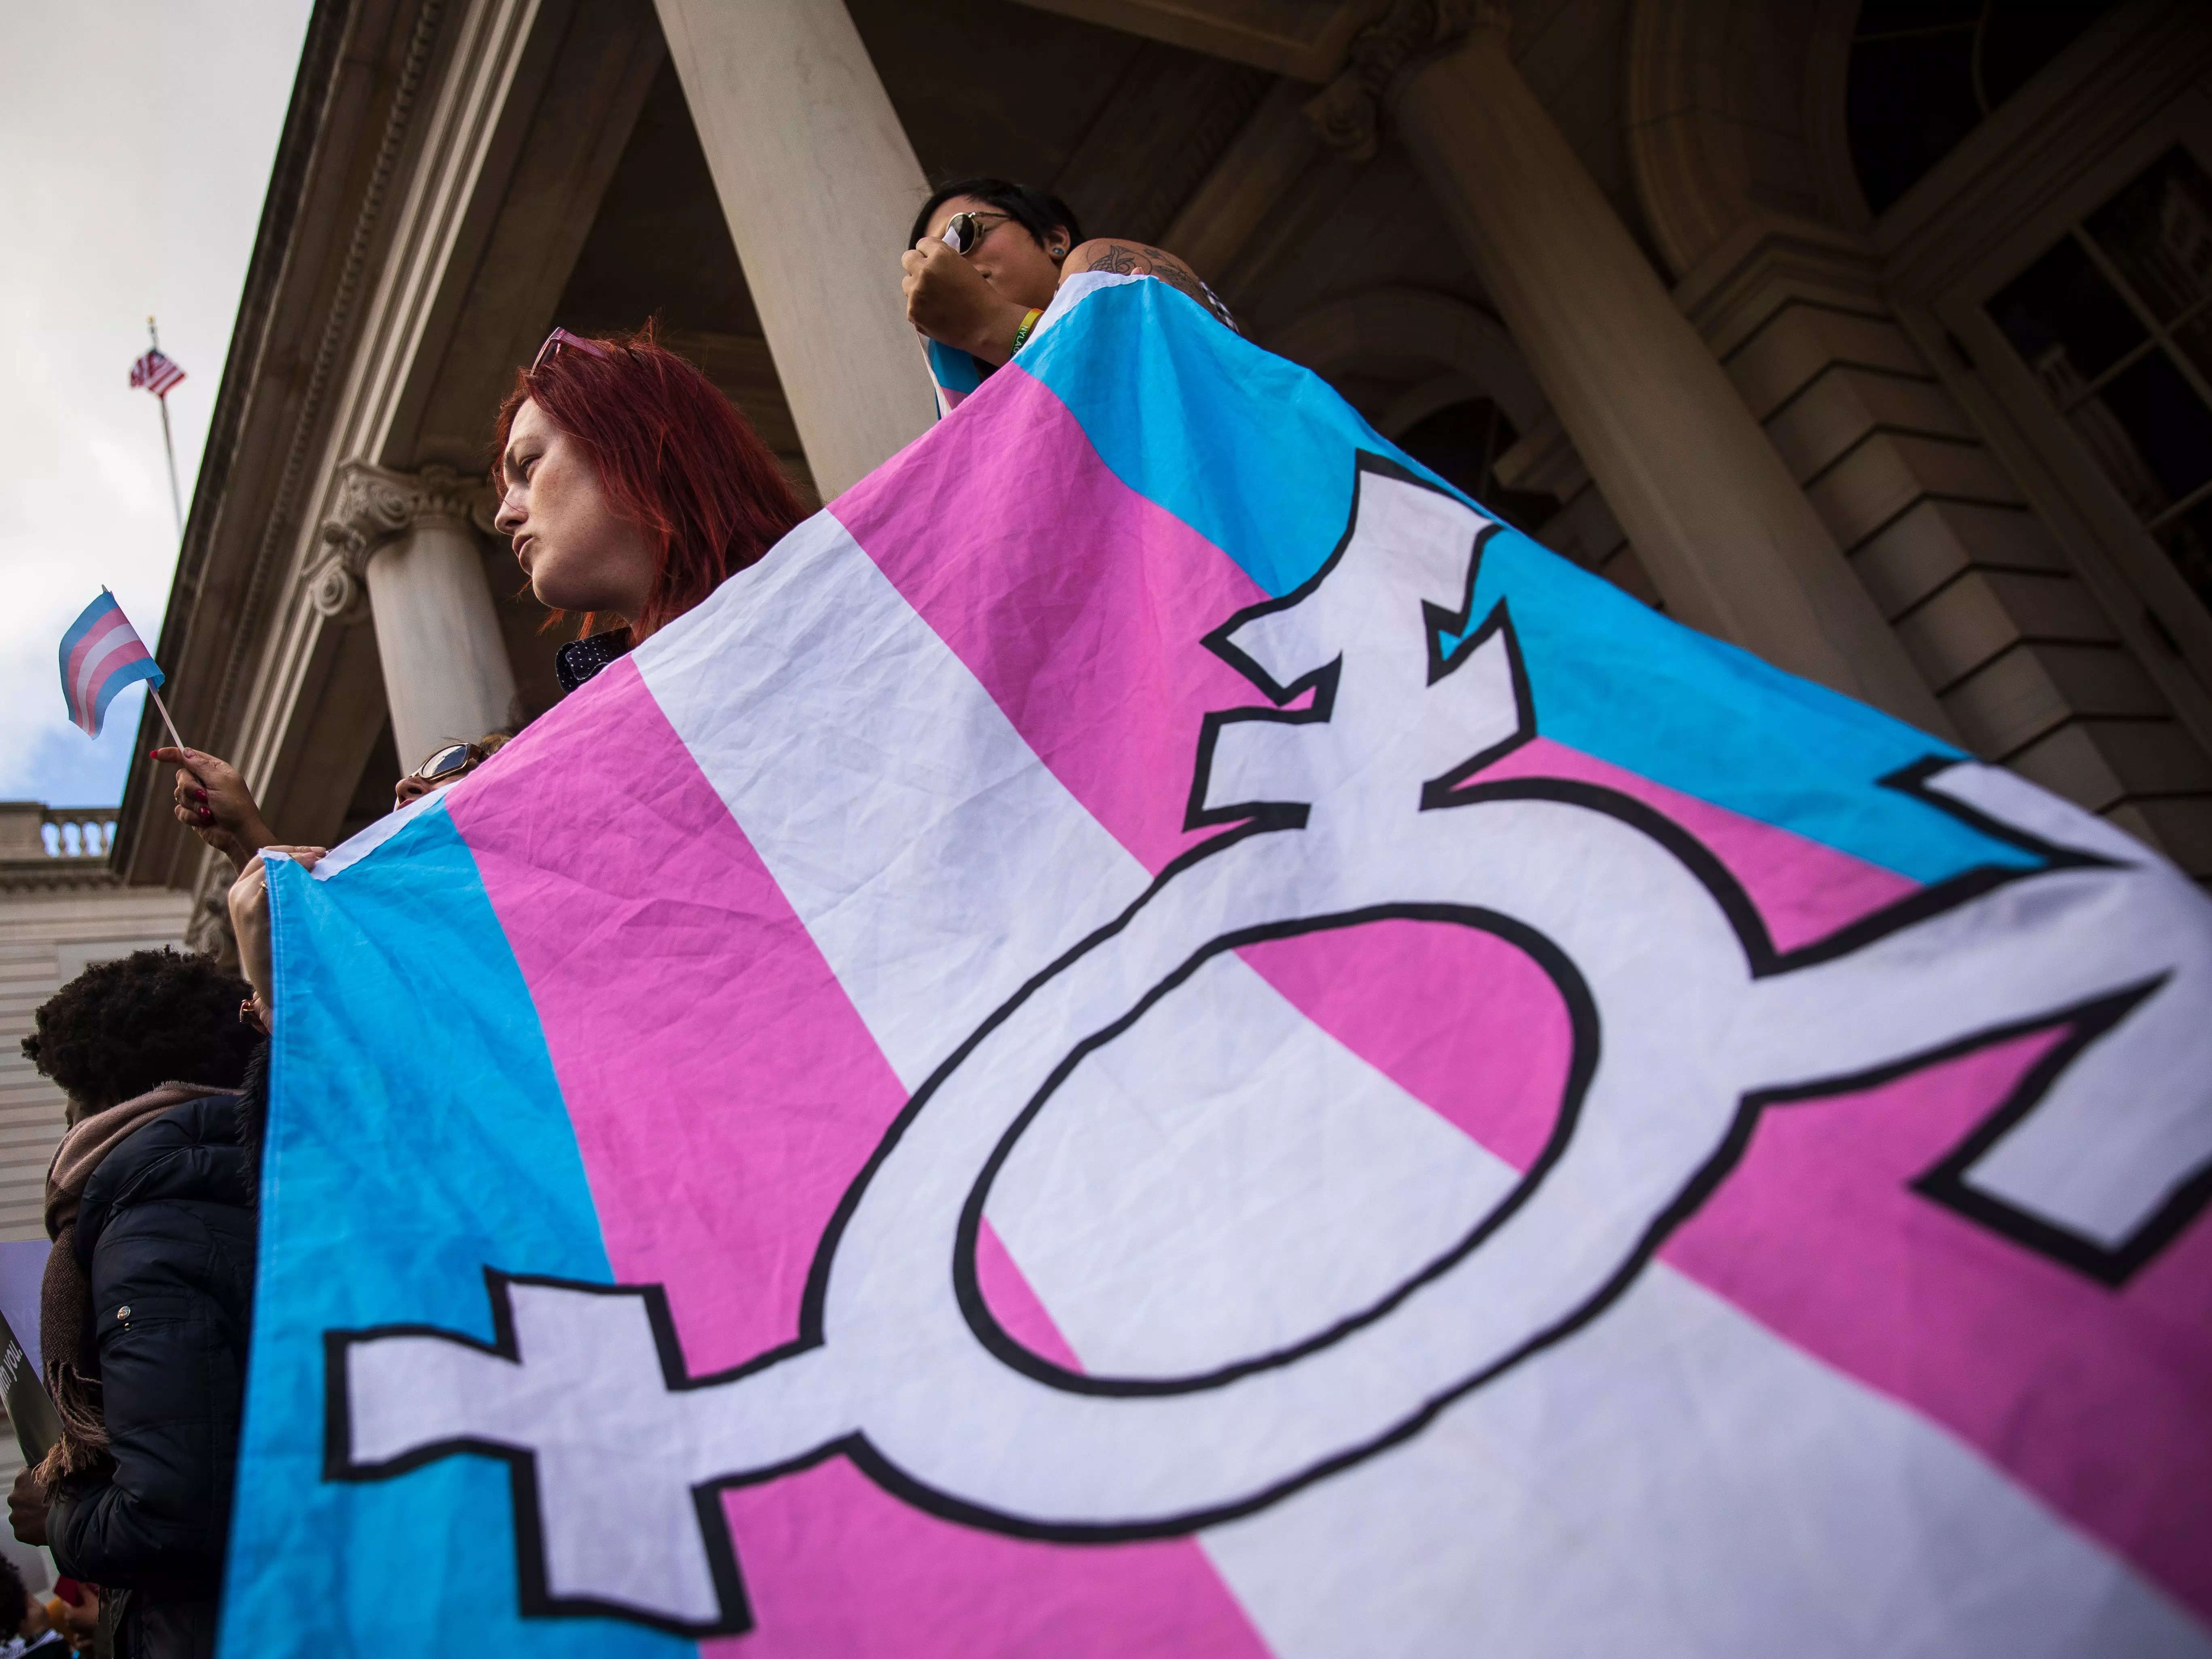 5 days into 2022, 5 anti-trans bills have already been introduced across the US